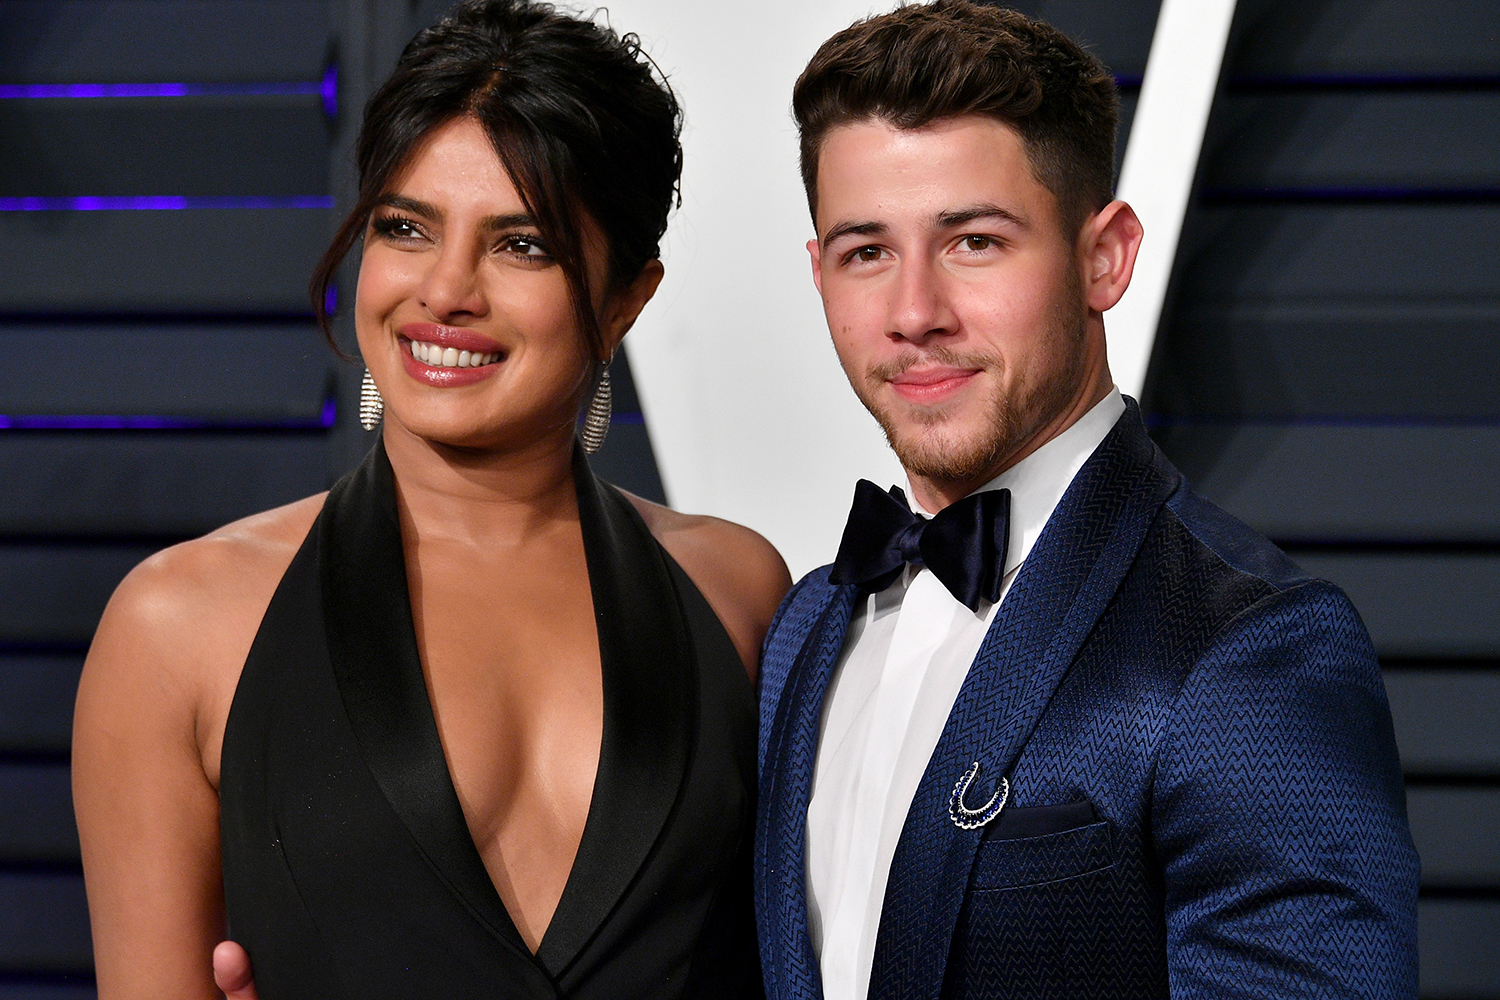 Priyanka Chopra Gets Candid In Discussing The Age Gap Between Her And Nick Jonas